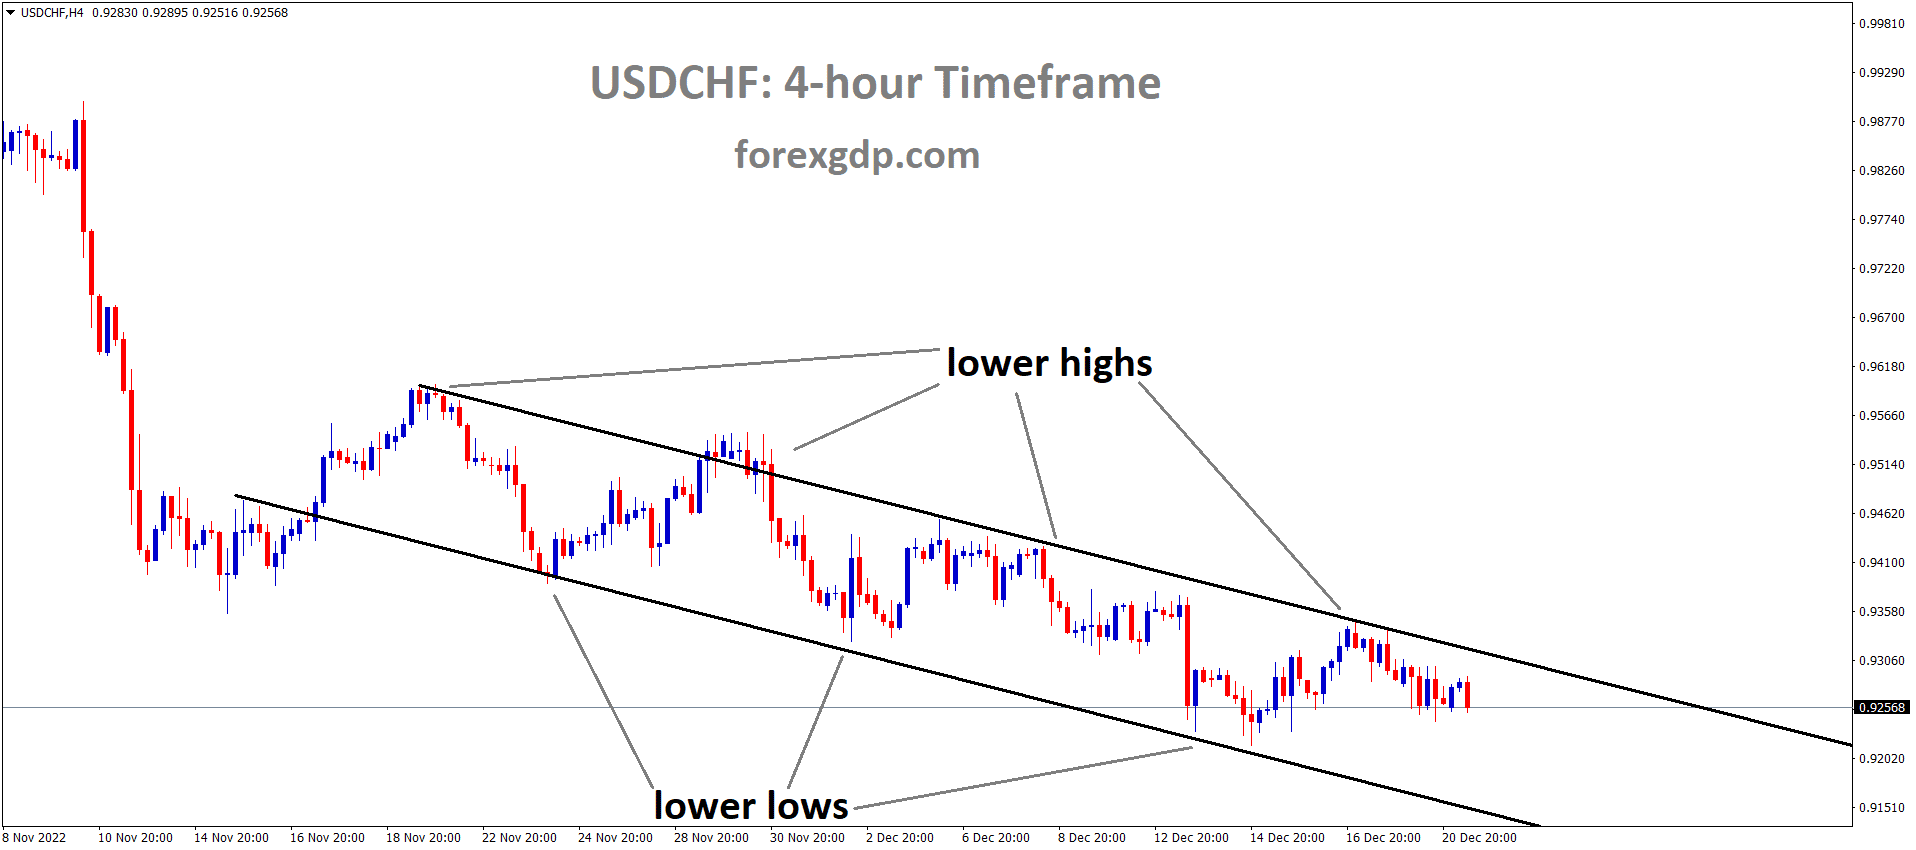 USDCHF is moving in the Descending channel and the market has fallen from the lower high area of the channel 3